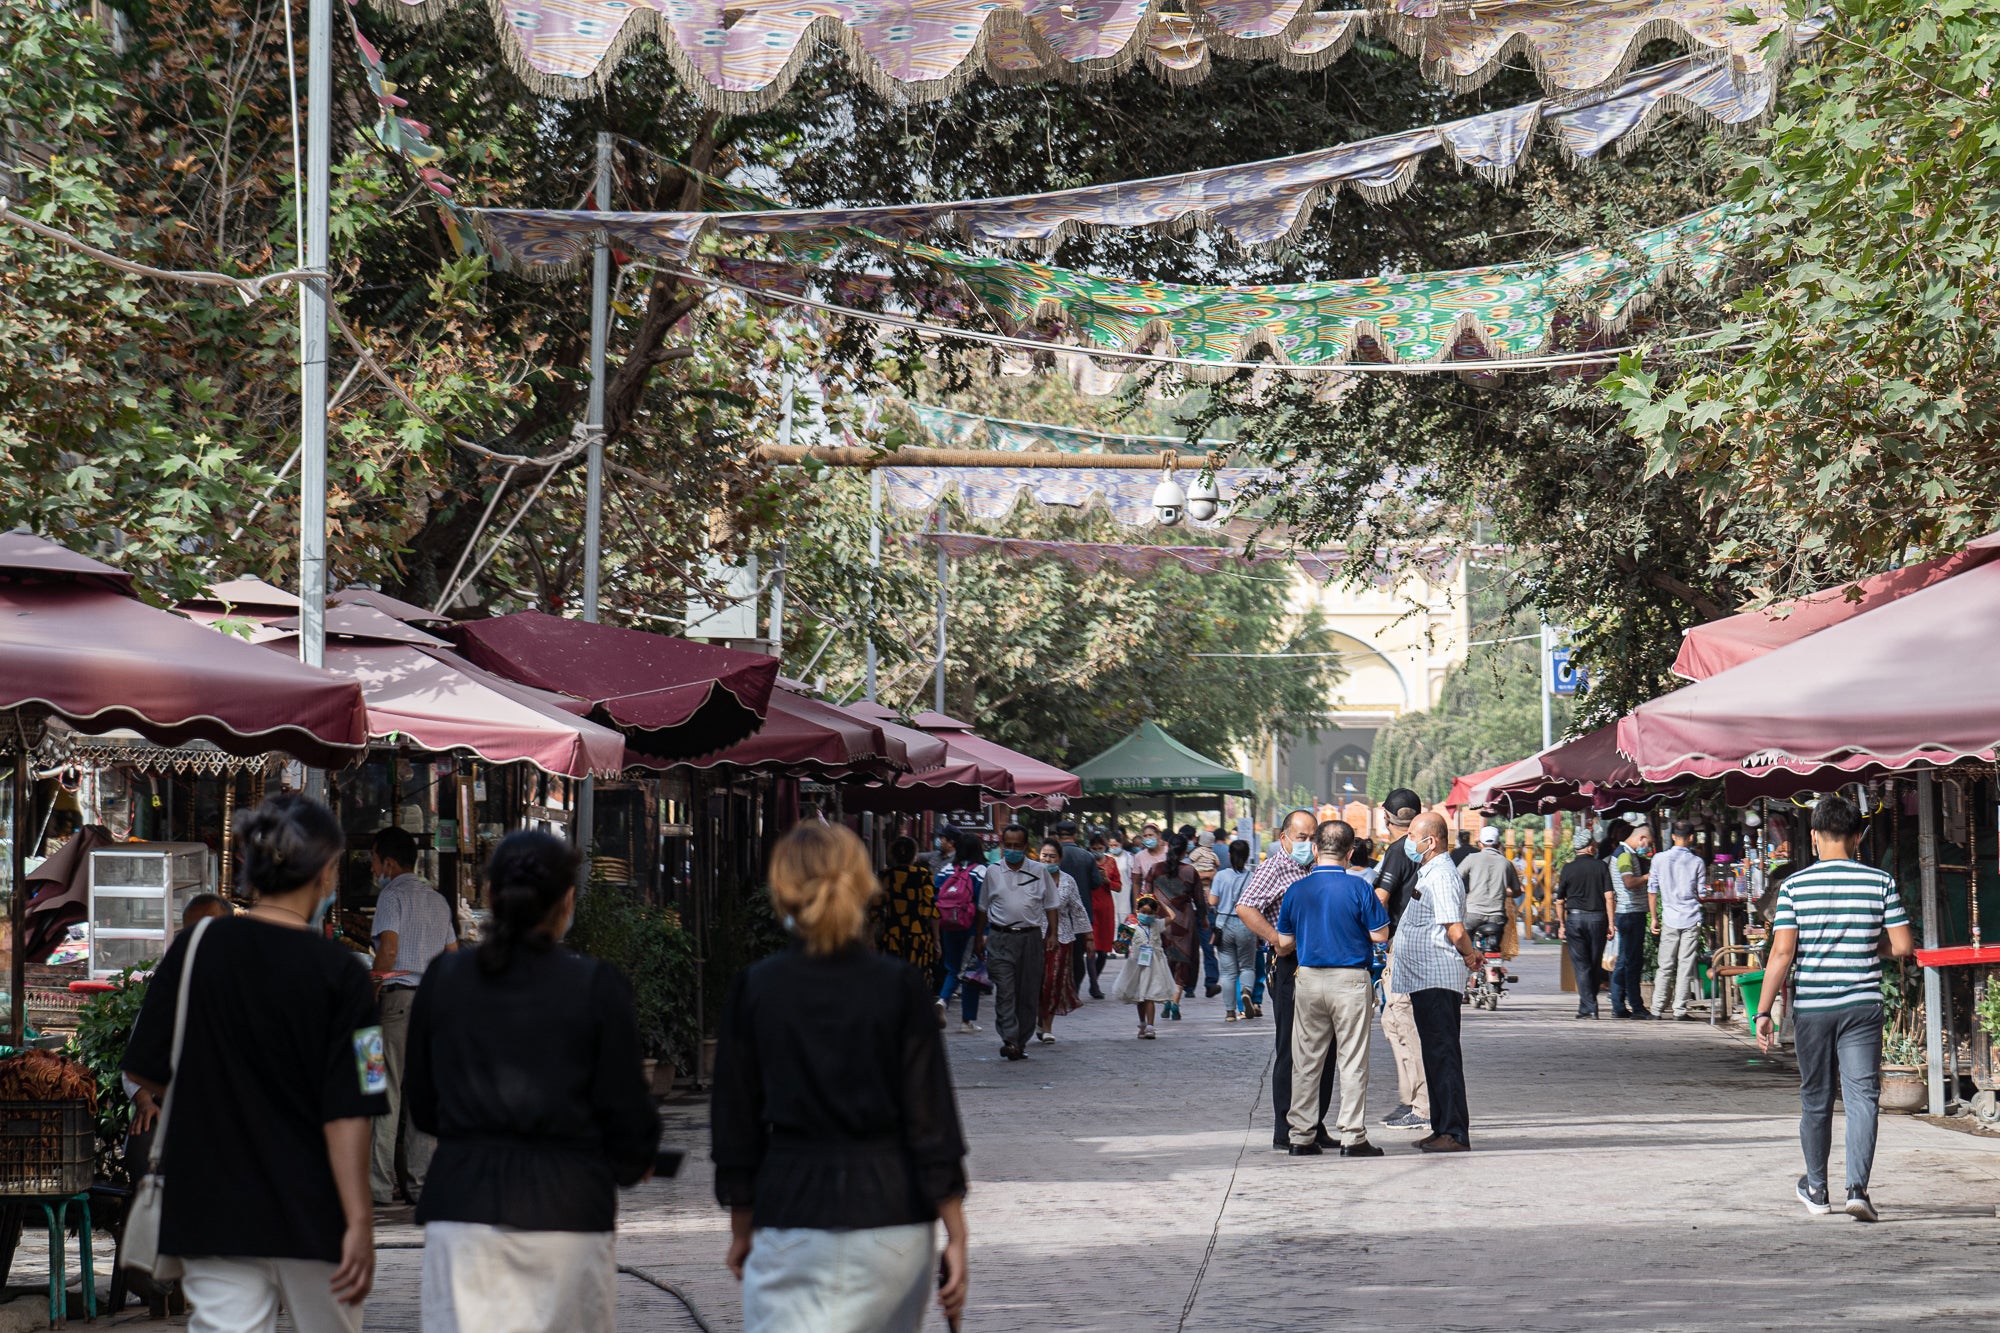 Kashgar’s Old City was once a key part of Islamic culture but is now theme park for Chinese tourists